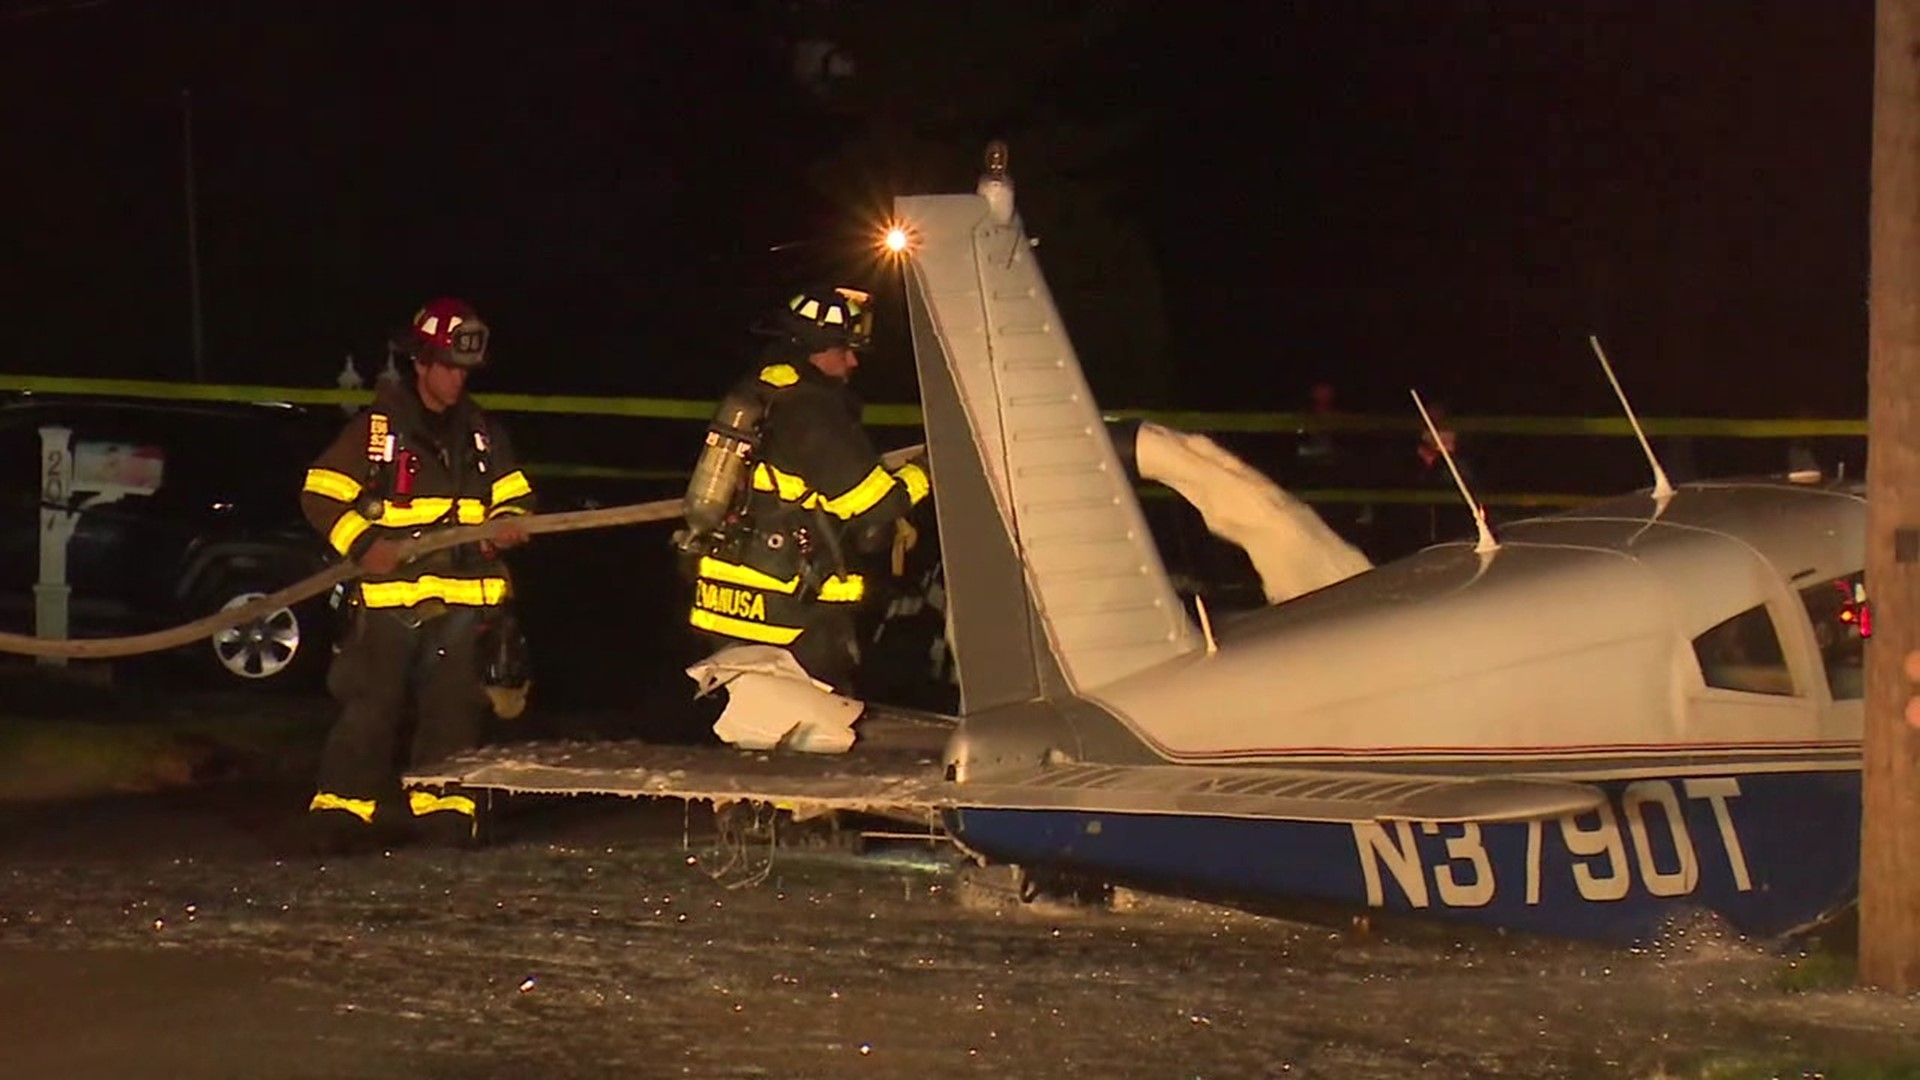 The plane crashed at about 8:30 p.m. on Stone Street in Moosic. Power for over 500 customers is out.